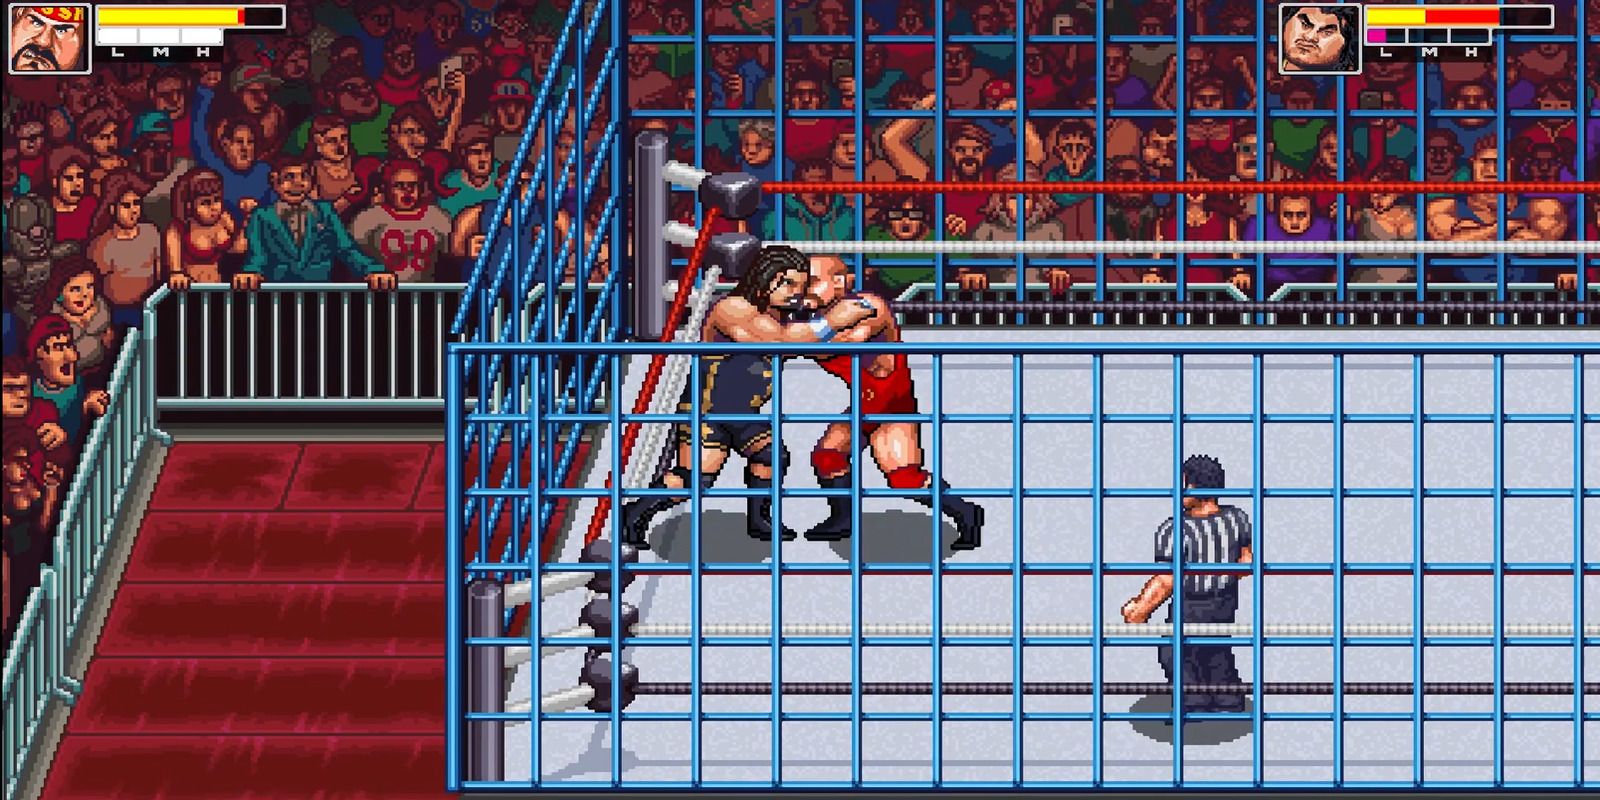 Wrestlers fighting in a cage